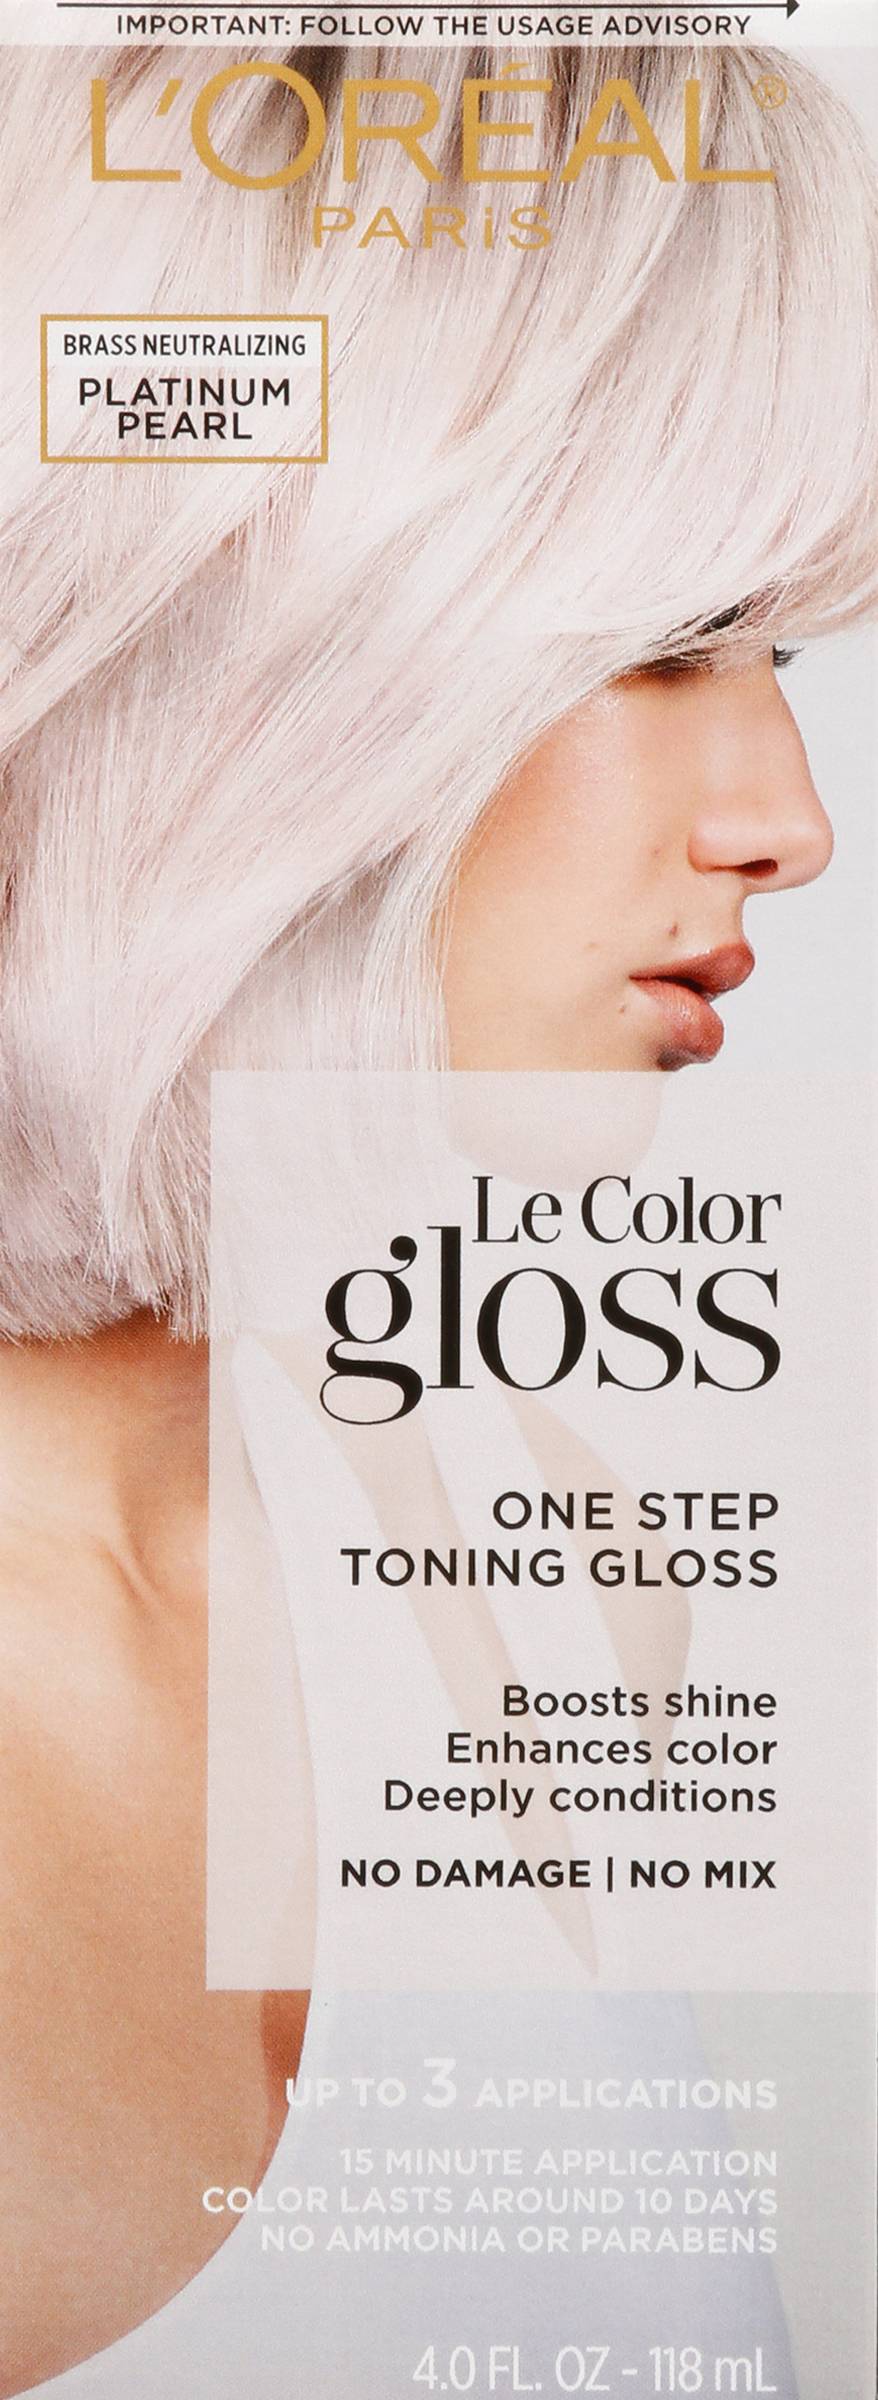 L'oreal One Step In-Shower Toning Gloss. Boosts Shine, Enhances Color, Deeply Conditions